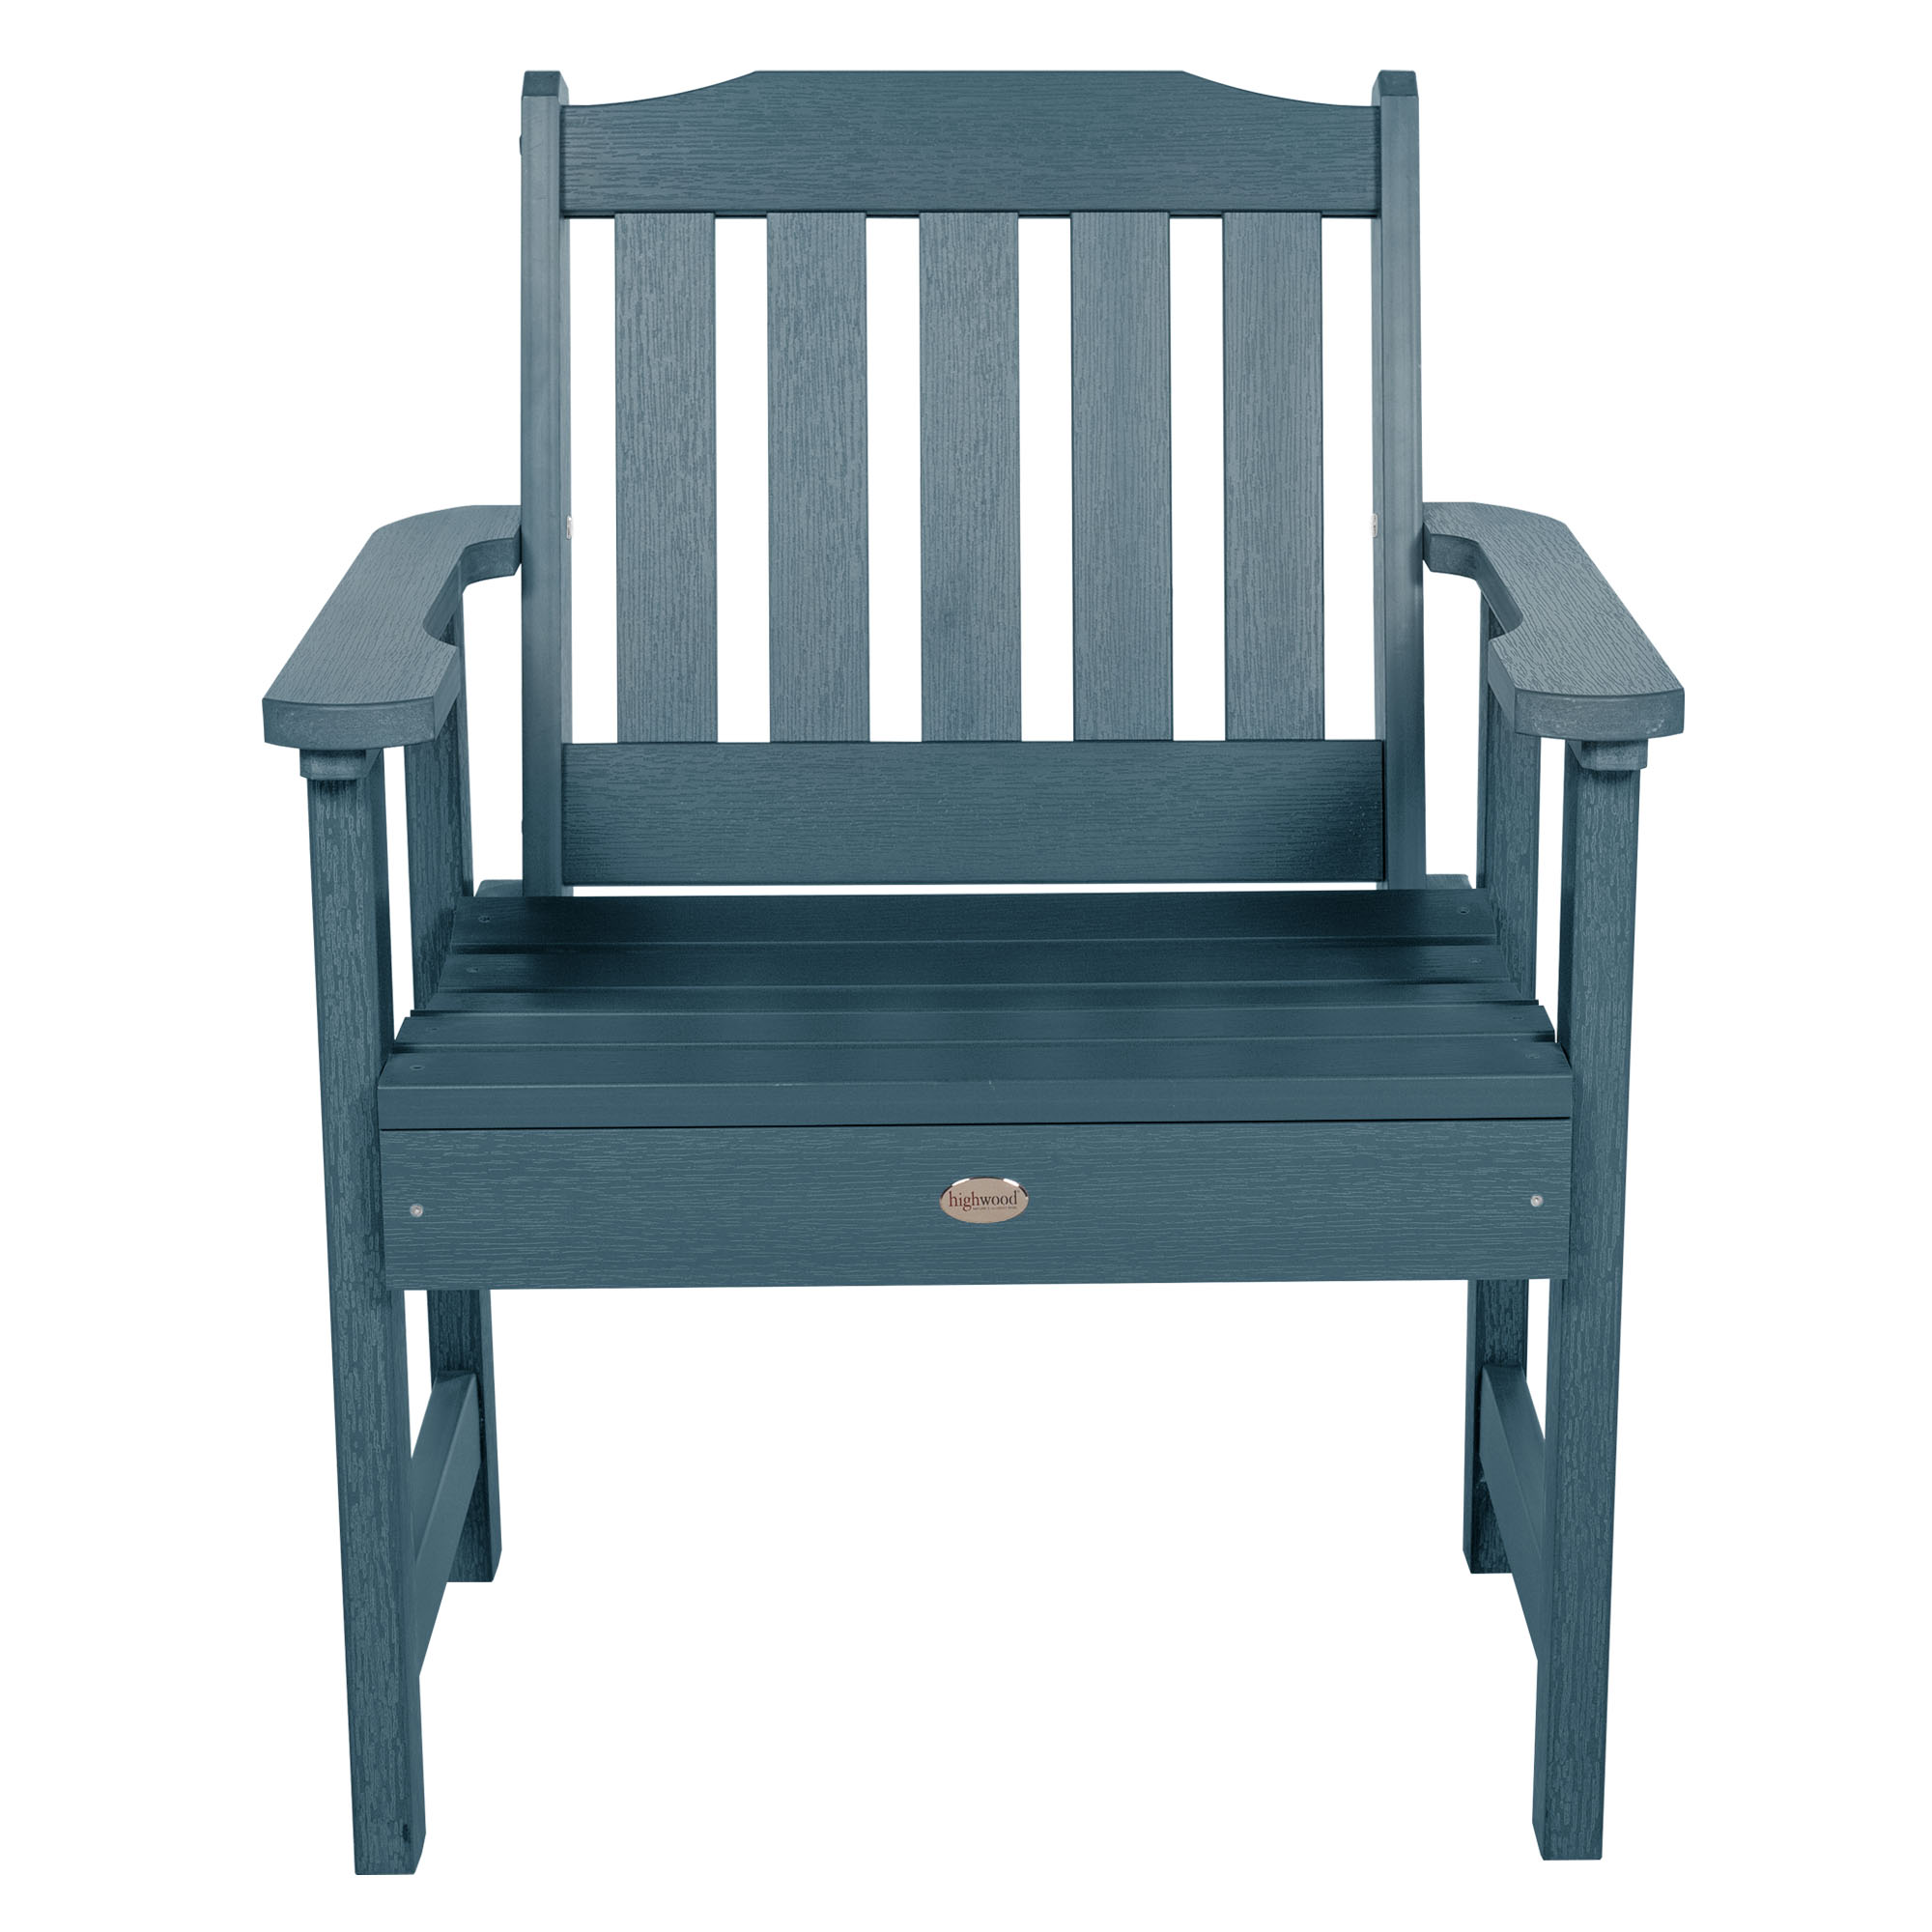 Highwood 3pc Lehigh Garden Chair Set with 1 Folding Adirondack Side Table - image 3 of 6